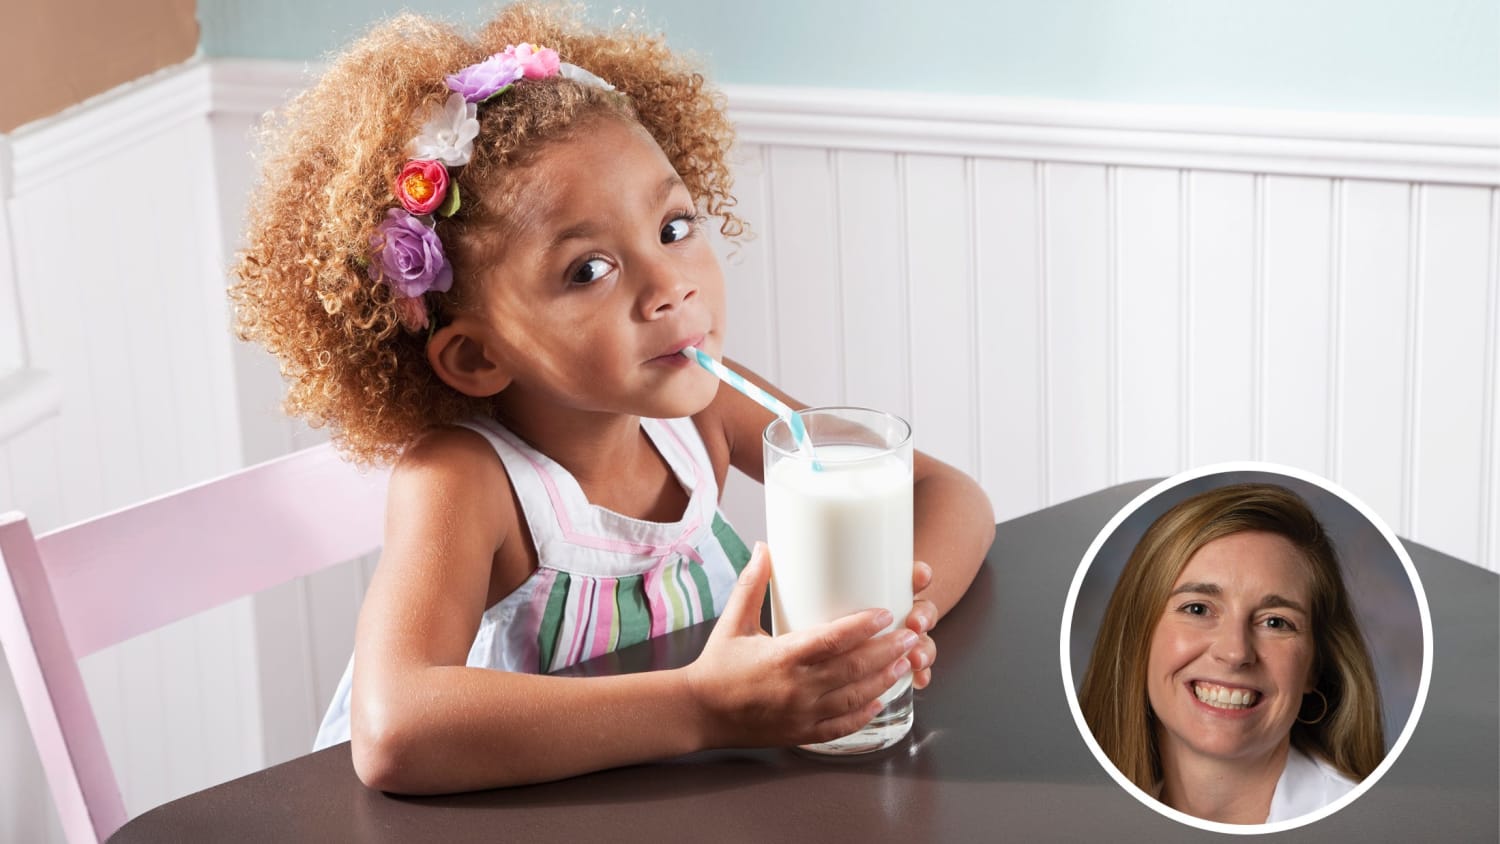 Pediatric HealthSource: Does Milk Cause Tooth Decay in Kids?